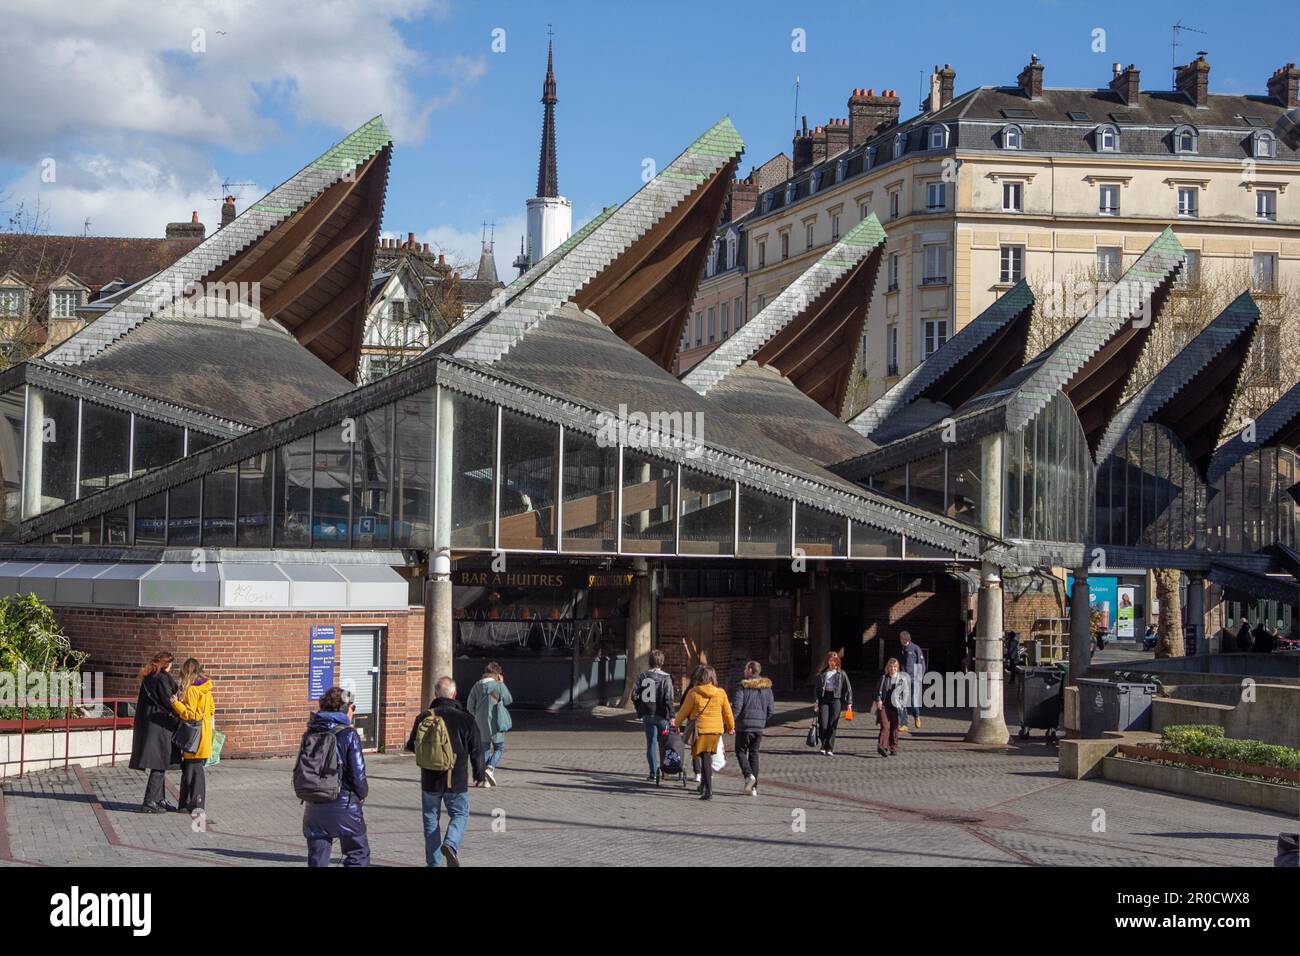 Rouen, France: the covered market, Place du Vieux Marché, by Louis Arretche is an architectural extension of the Joan of Arc church just next to it. Stock Photo